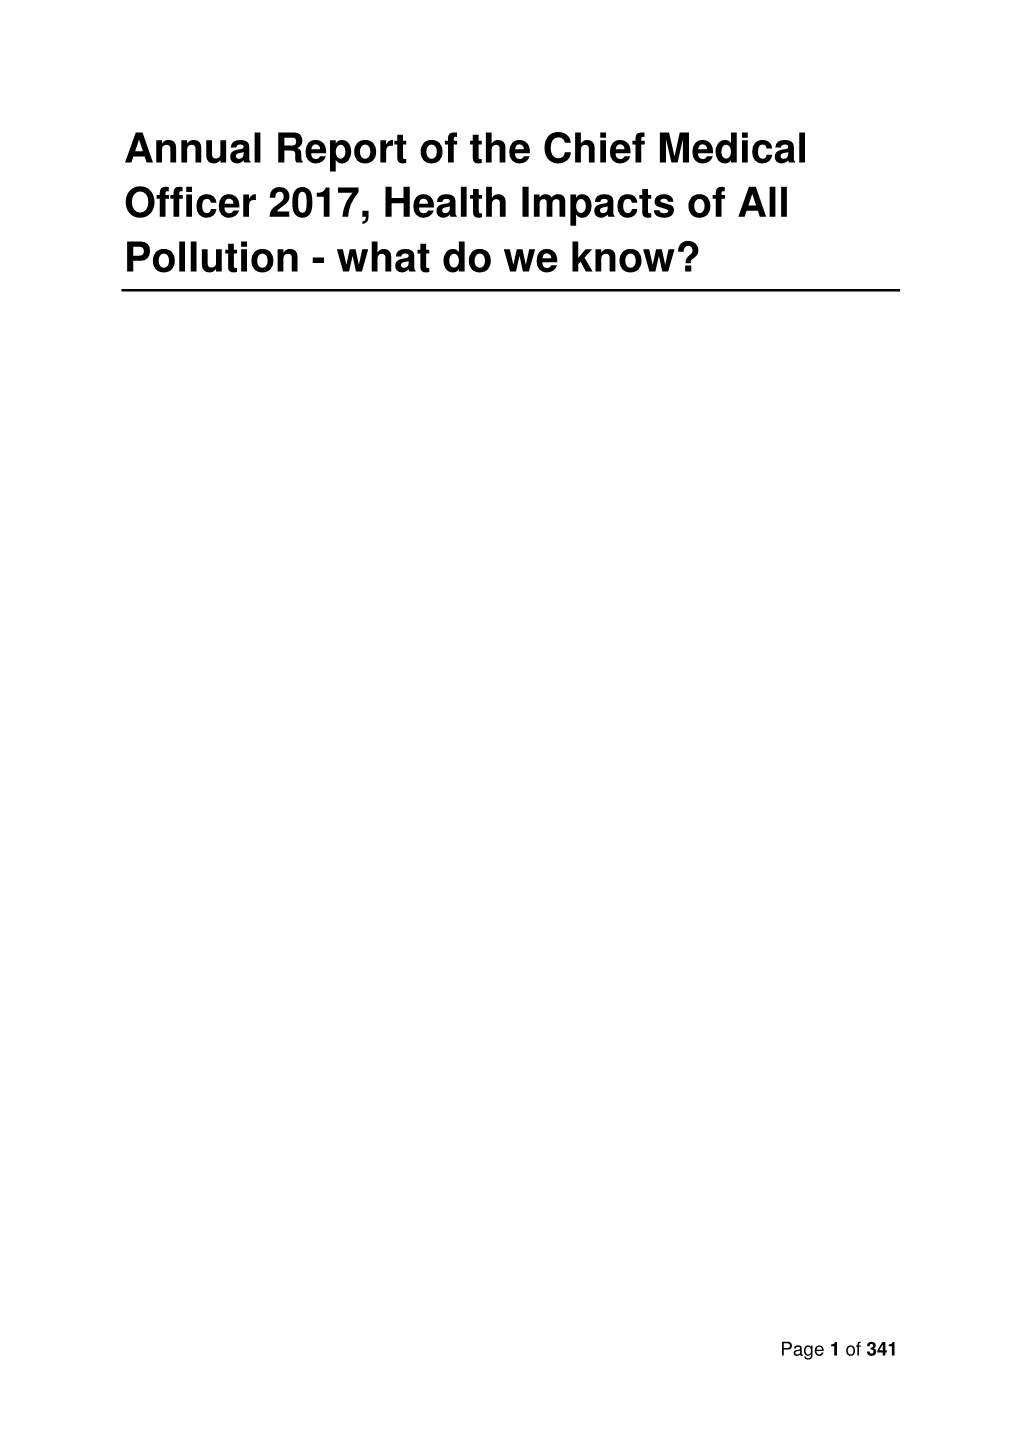 Annual Report of the Chief Medical Officer 2017, Health Impacts of All Pollution - What Do We Know?